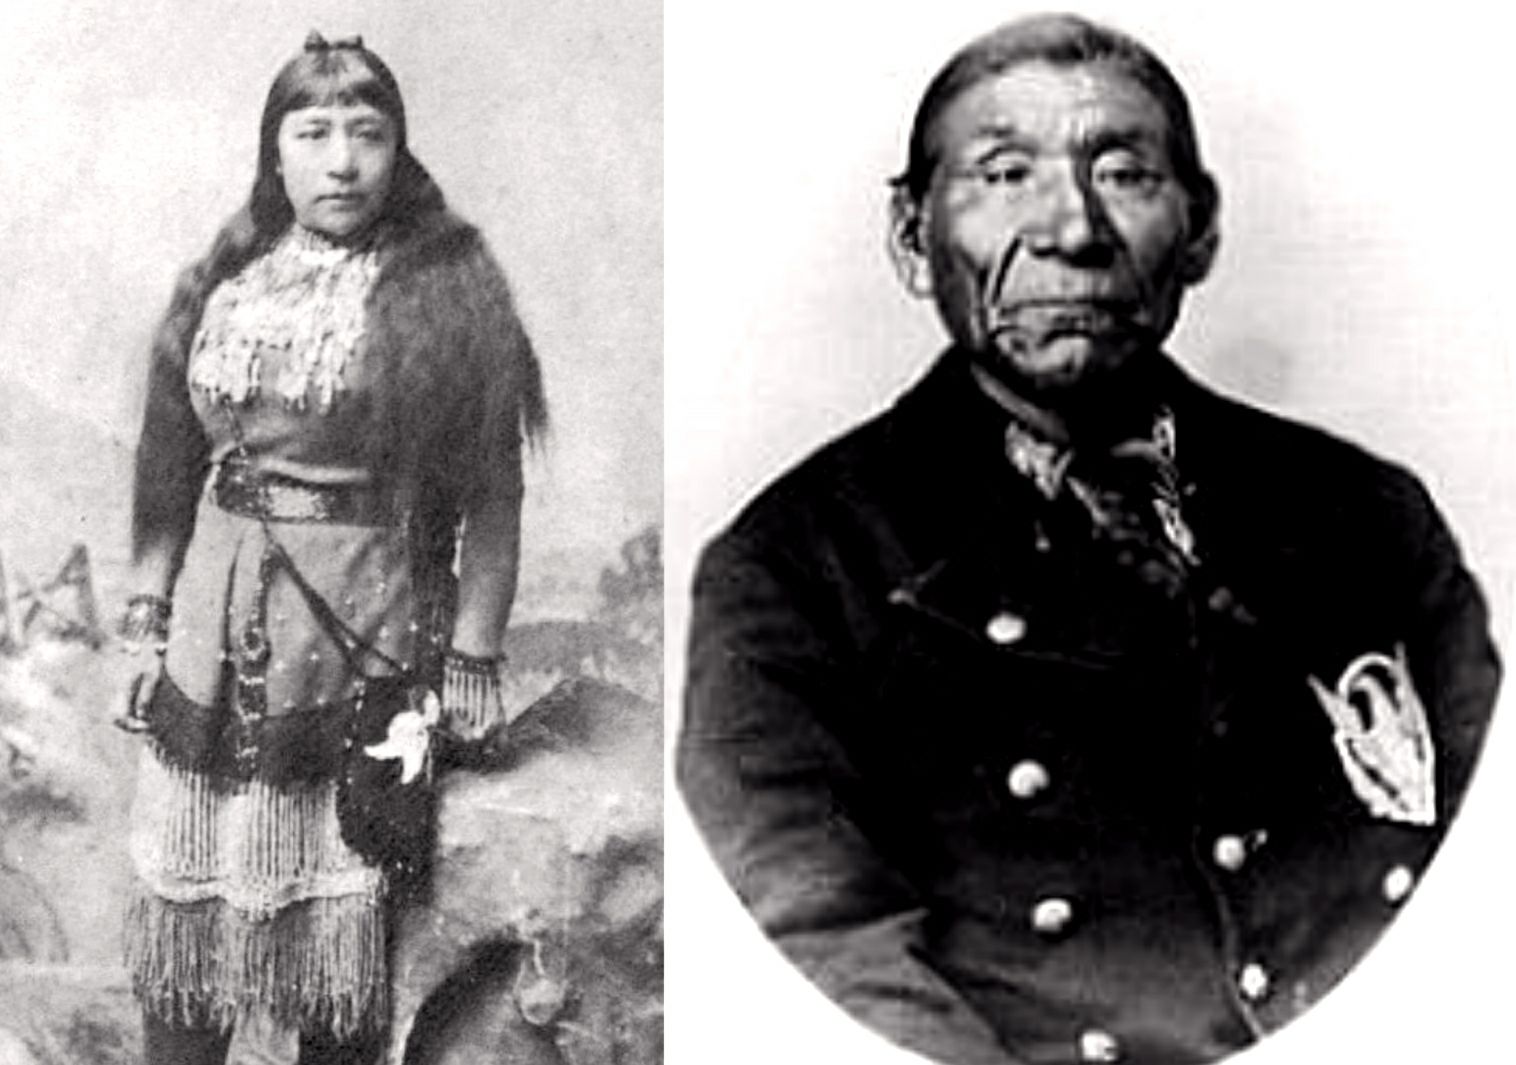 Sarah Winnemucca, Paiute Writer and Lecturer, alongside her father and Chief Poito Winnemucca of the Paiute Natives in Nevada